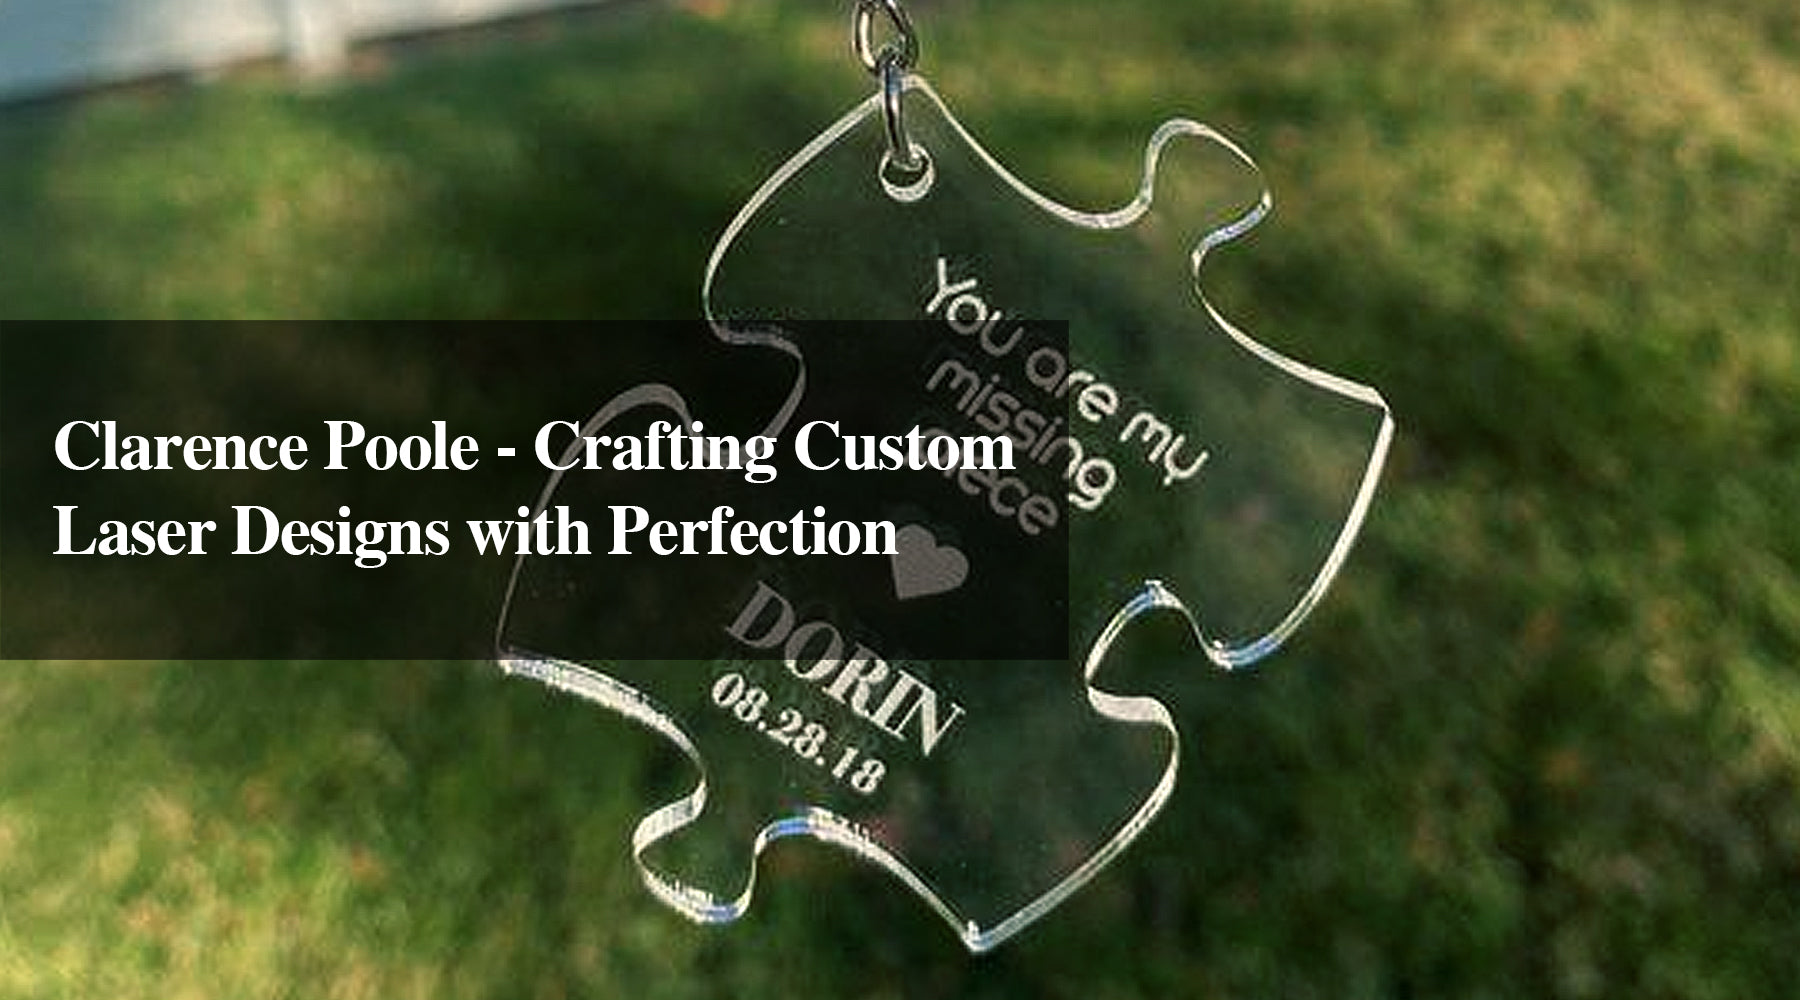 Clarence Poole - Crafting Custom Laser Designs with Perfection